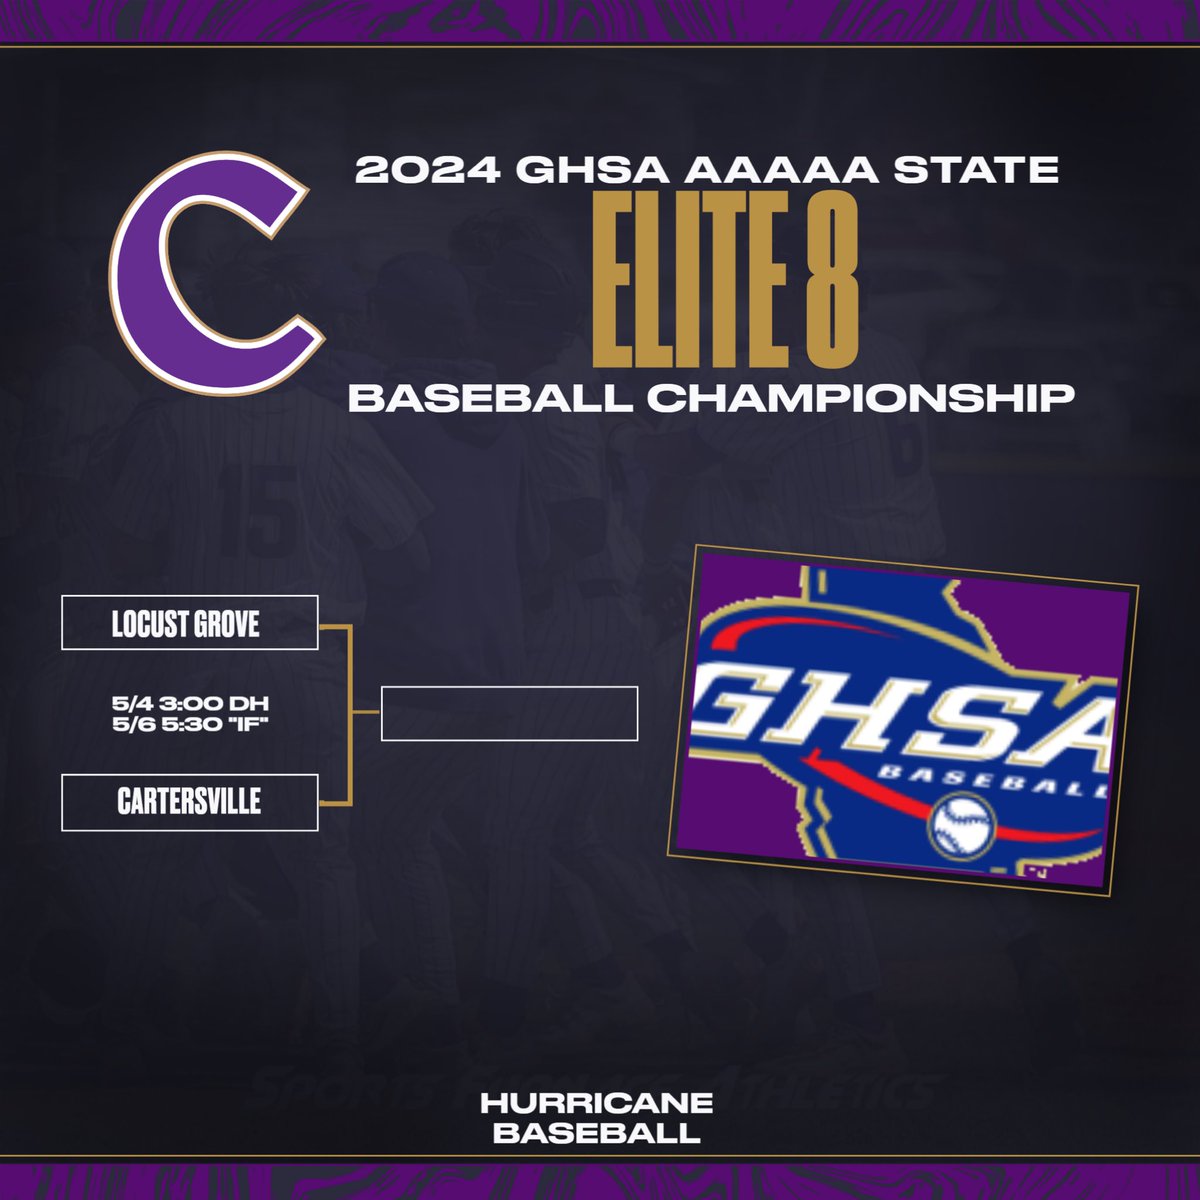 Cartersville will host Locust Grove in the Quarterfinals of the GHSA AAAAA State Baseball Championship Saturday, May 4, in a DH beginning at 3:00PM. The “If” Game is scheduled for Monday, May 6 at 5:30PM.